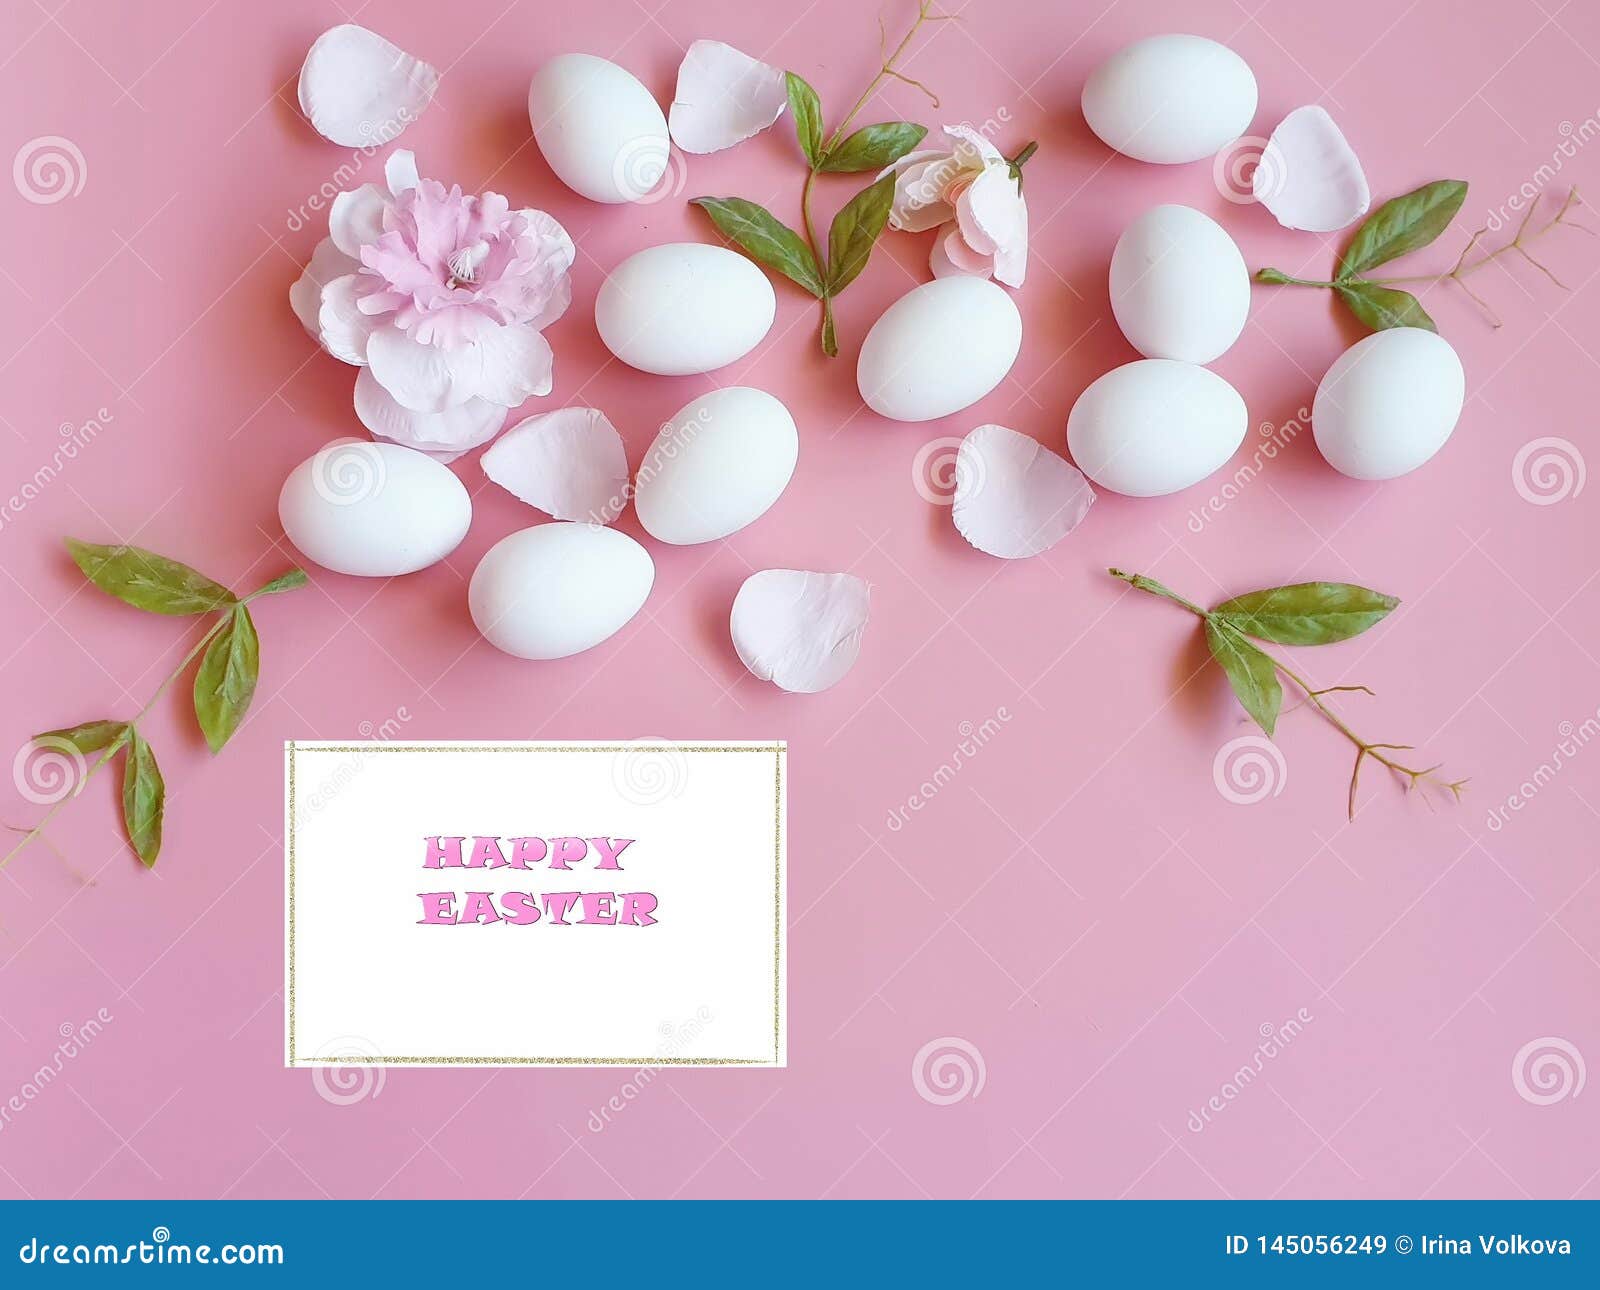 Happy Easter Eggs White with Roses Petal on Pink Background Stock Image ...